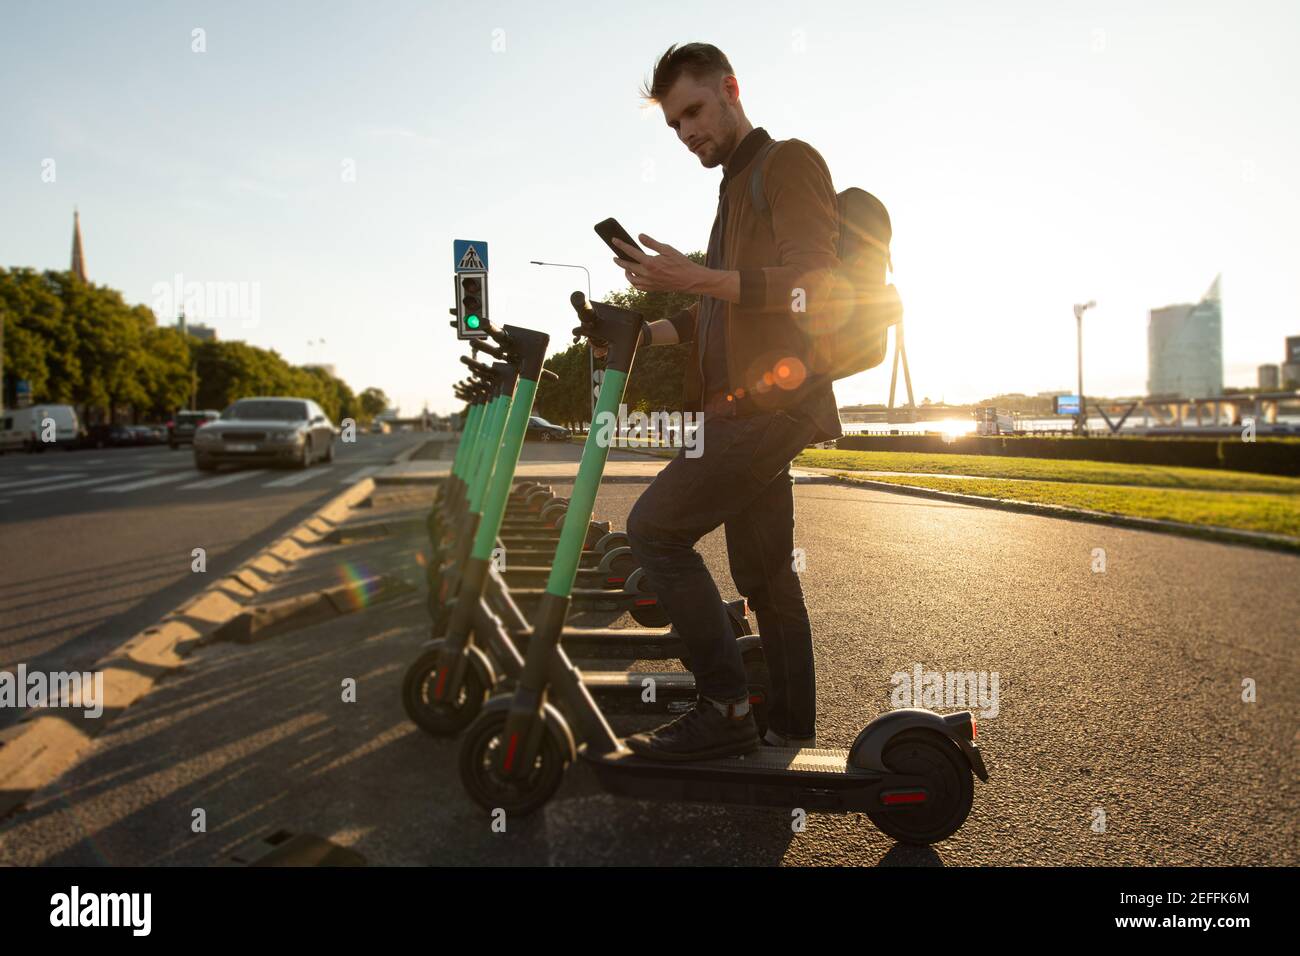 Ecology transportation and sustainability in cities. Person using electric scooter new way city mobility. Green transportation climate neutral goals Stock Photo